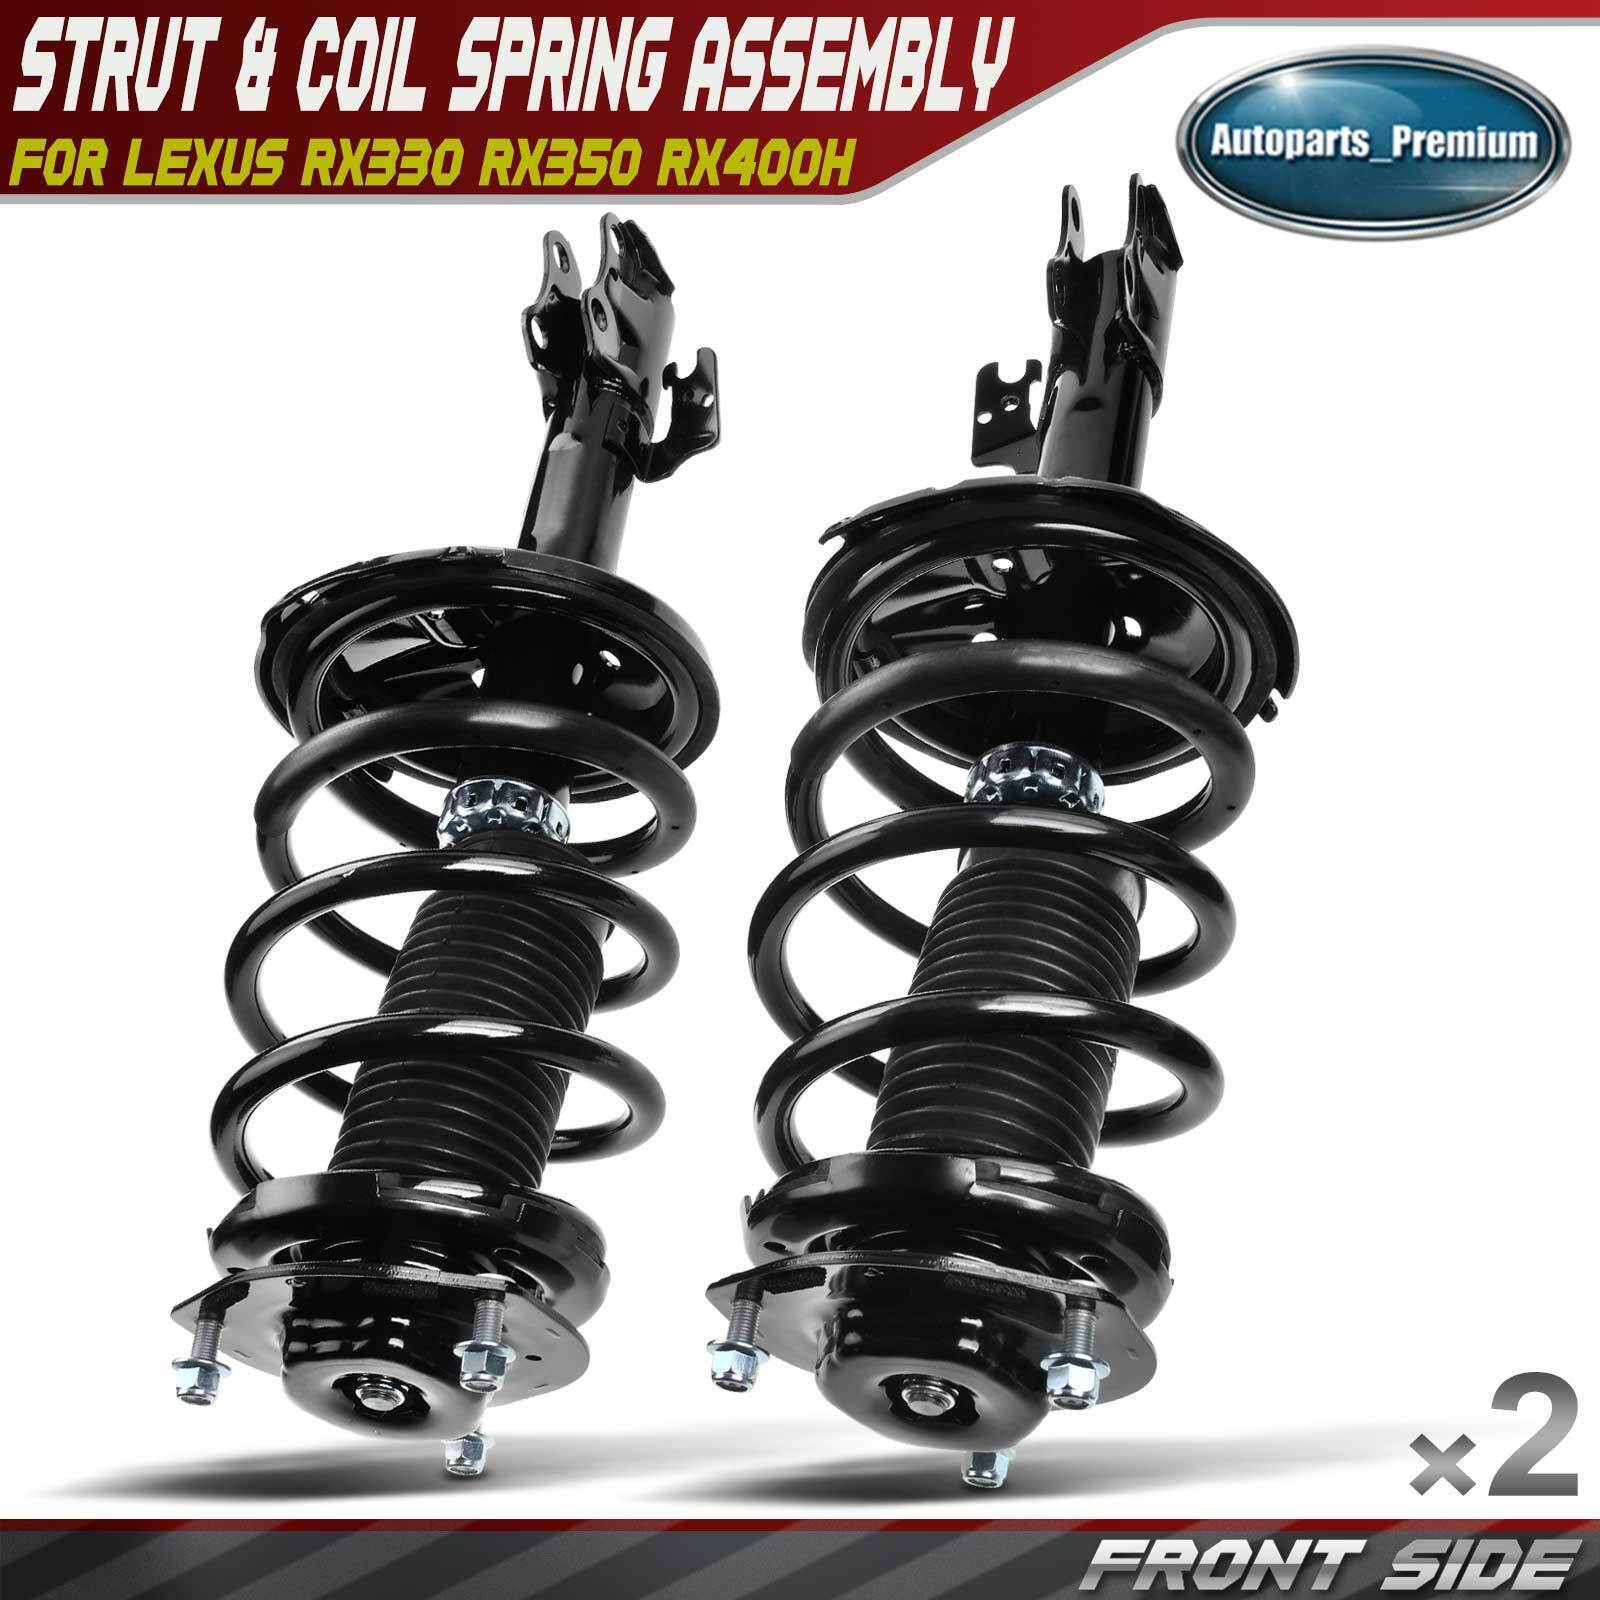 2x Front Complete Strut Coil Spring Assembly for Lexus RX330 RX350 RX400h AWD